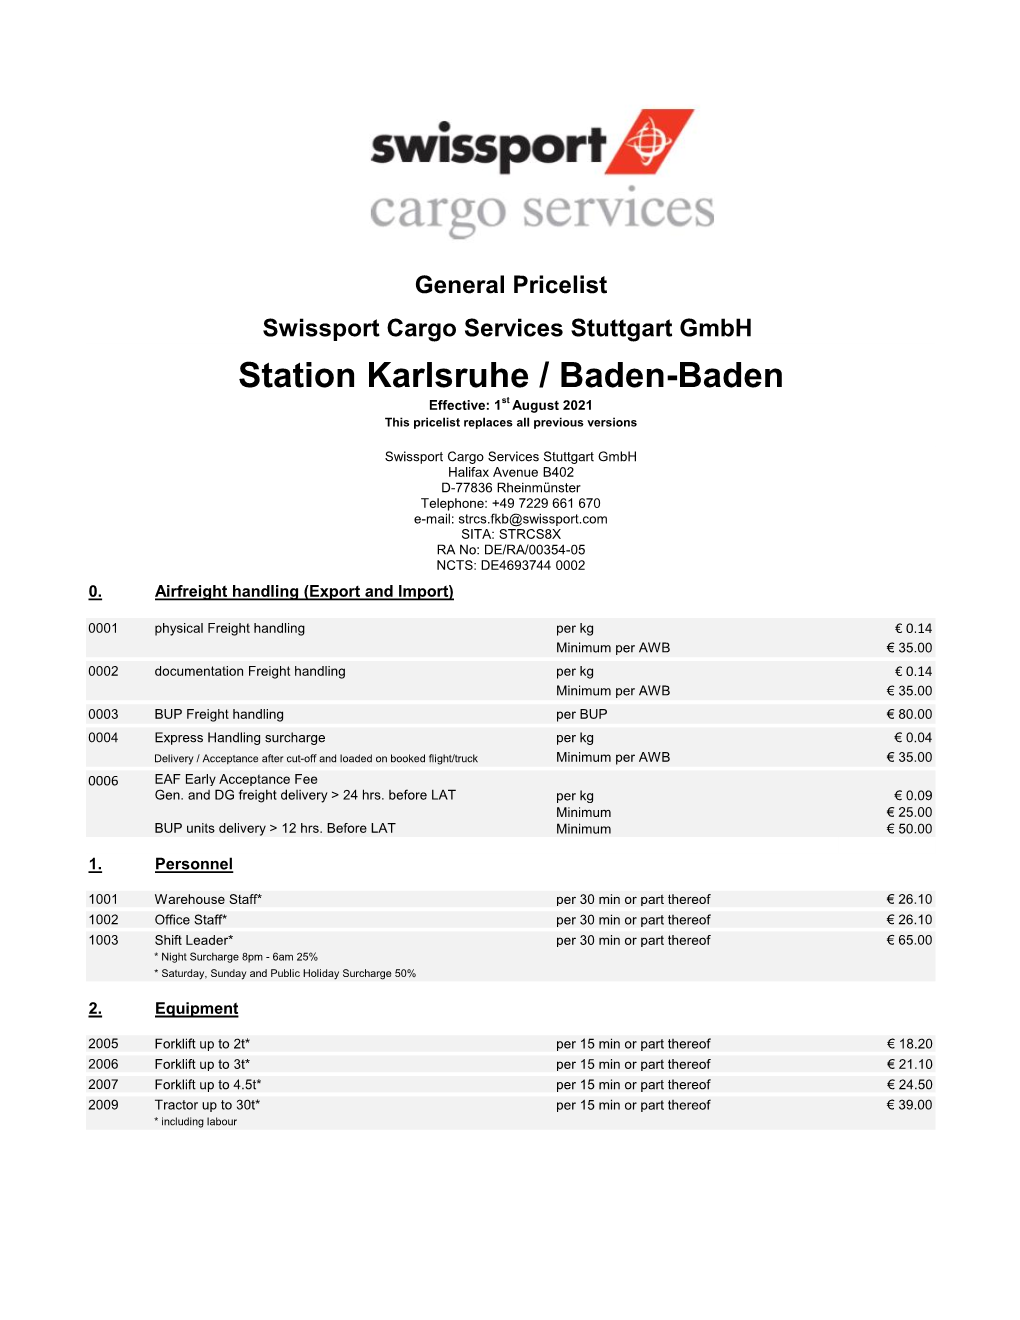 Station Karlsruhe / Baden-Baden Effective: 1St August 2021 This Pricelist Replaces All Previous Versions